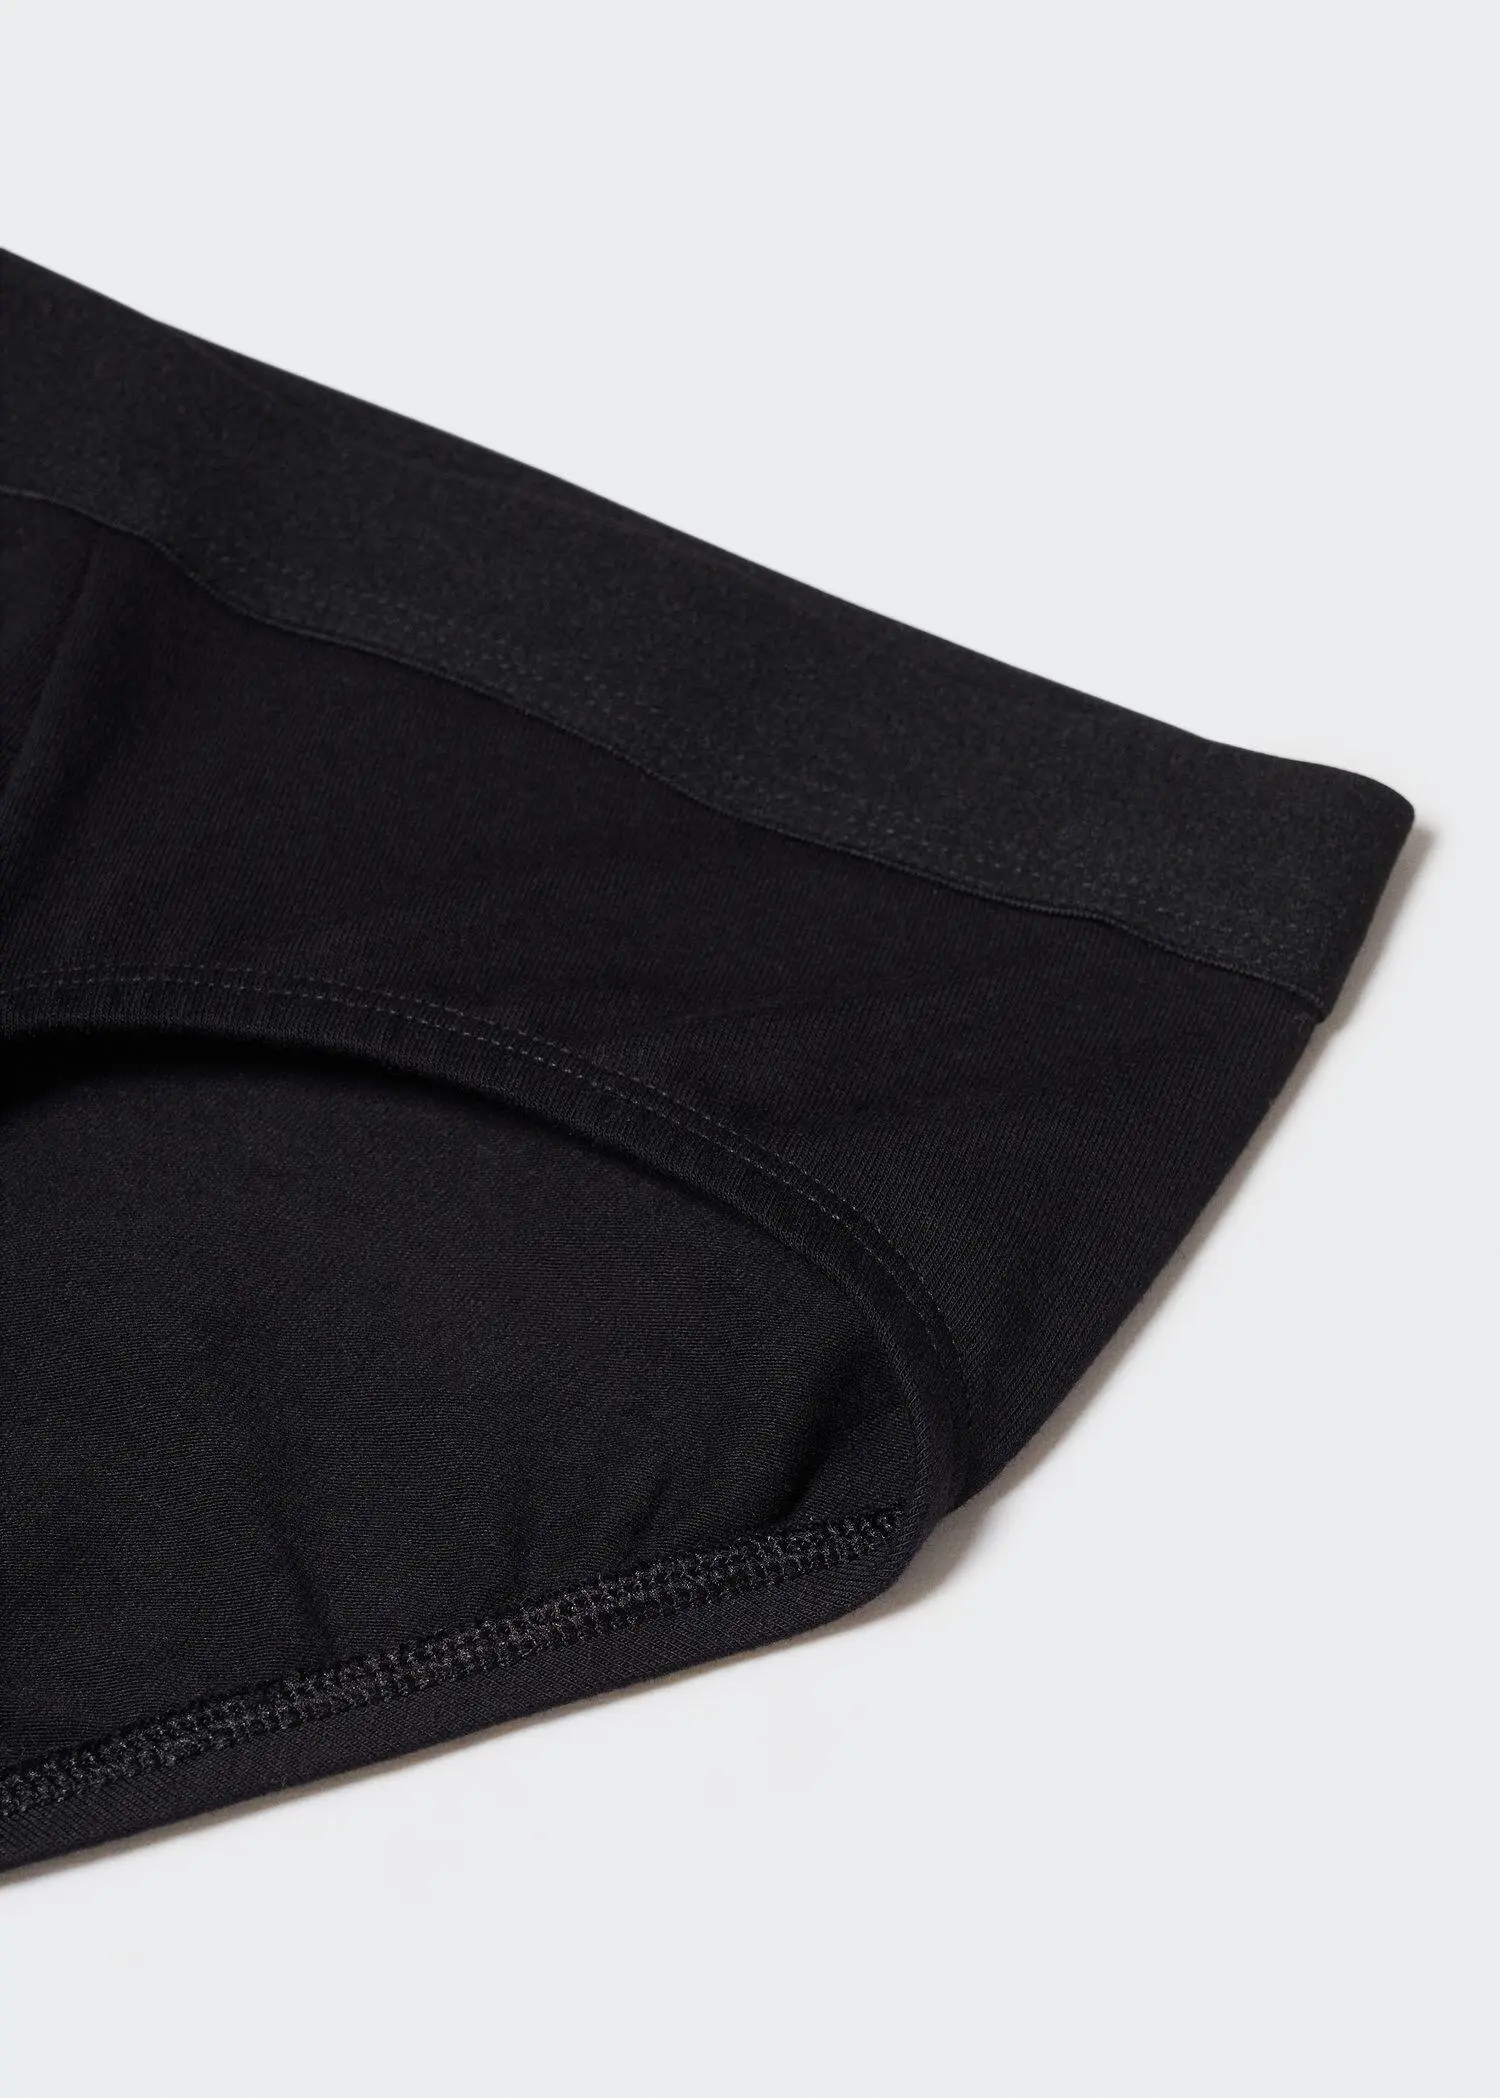 Mango 2 pack basic briefs . a close-up view of the bottom portion of a pair of underwear. 